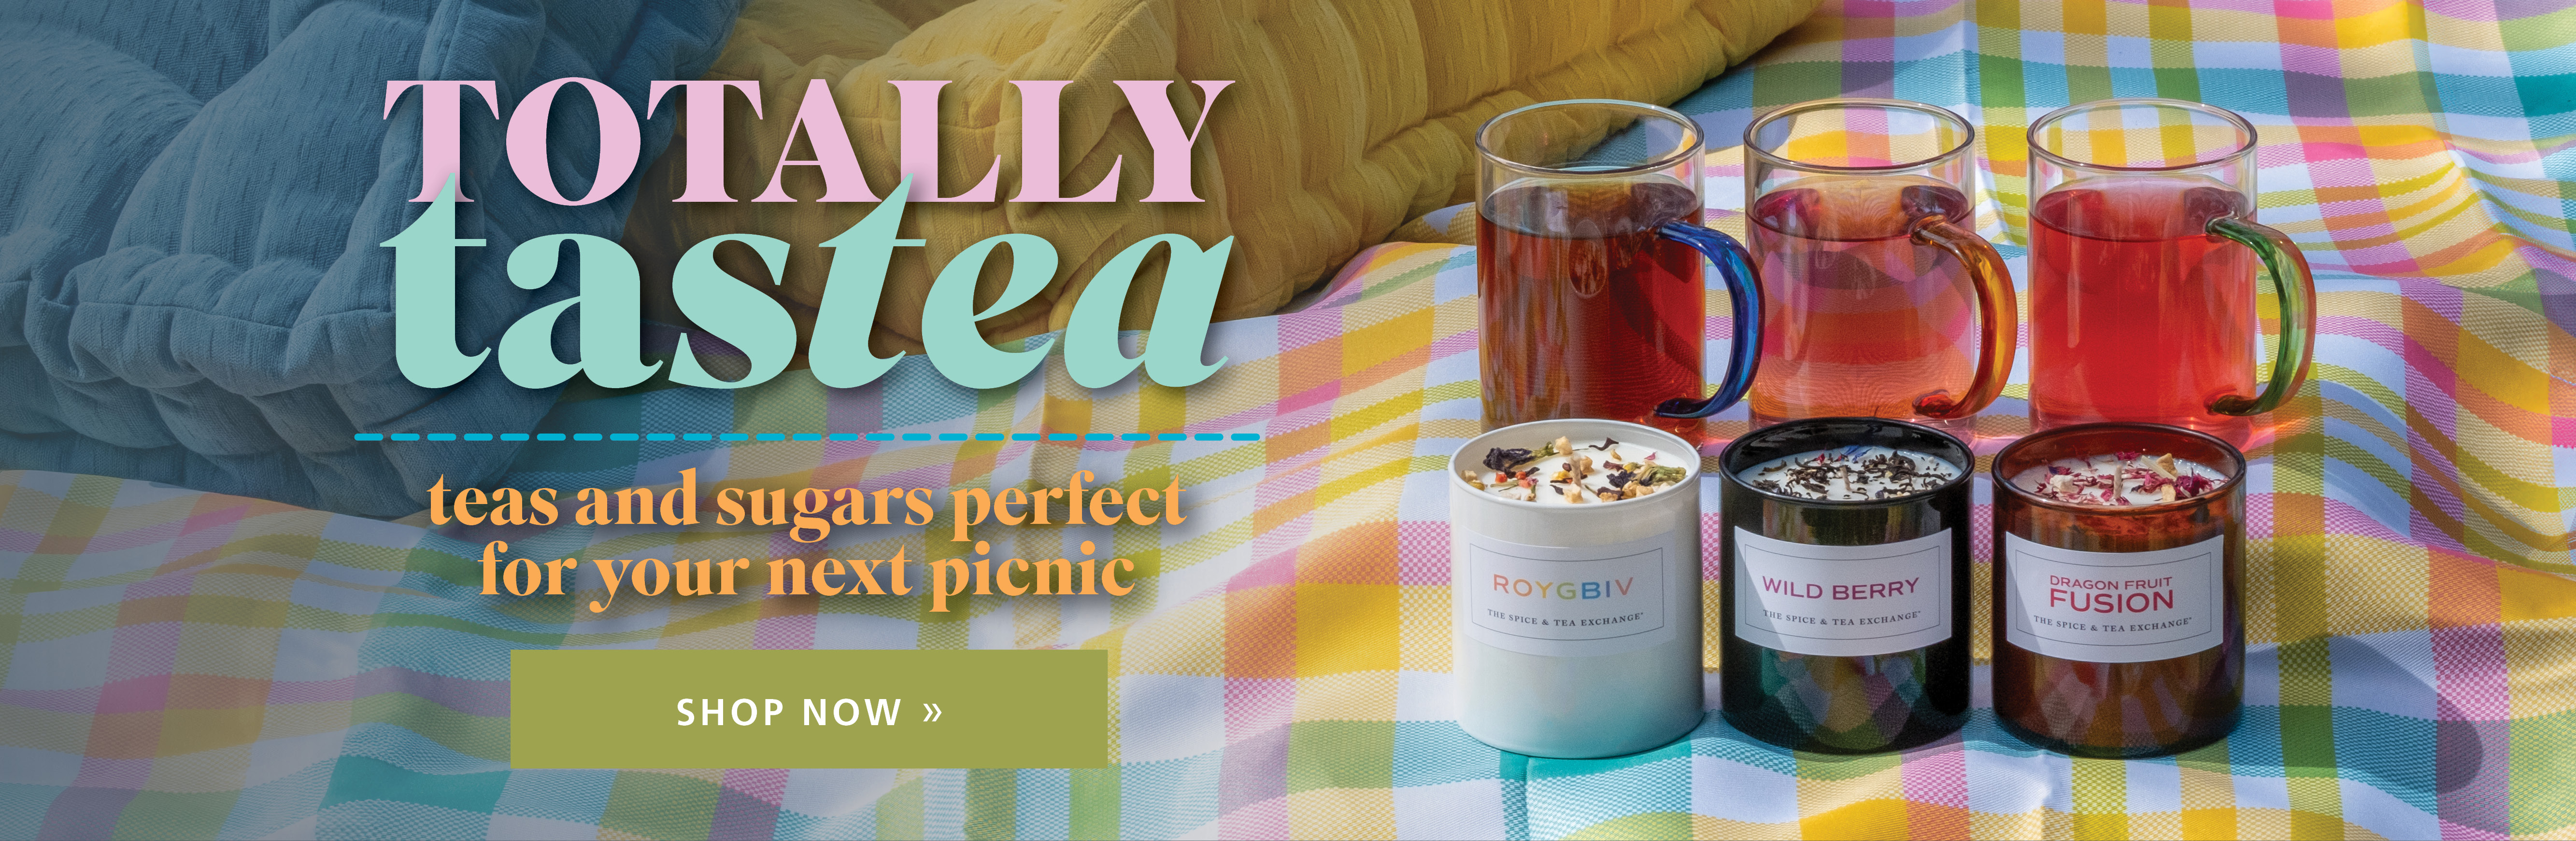 Slide 1: TOTALLY tastea - teas and sugars perfect for your next picnic - Shop Now